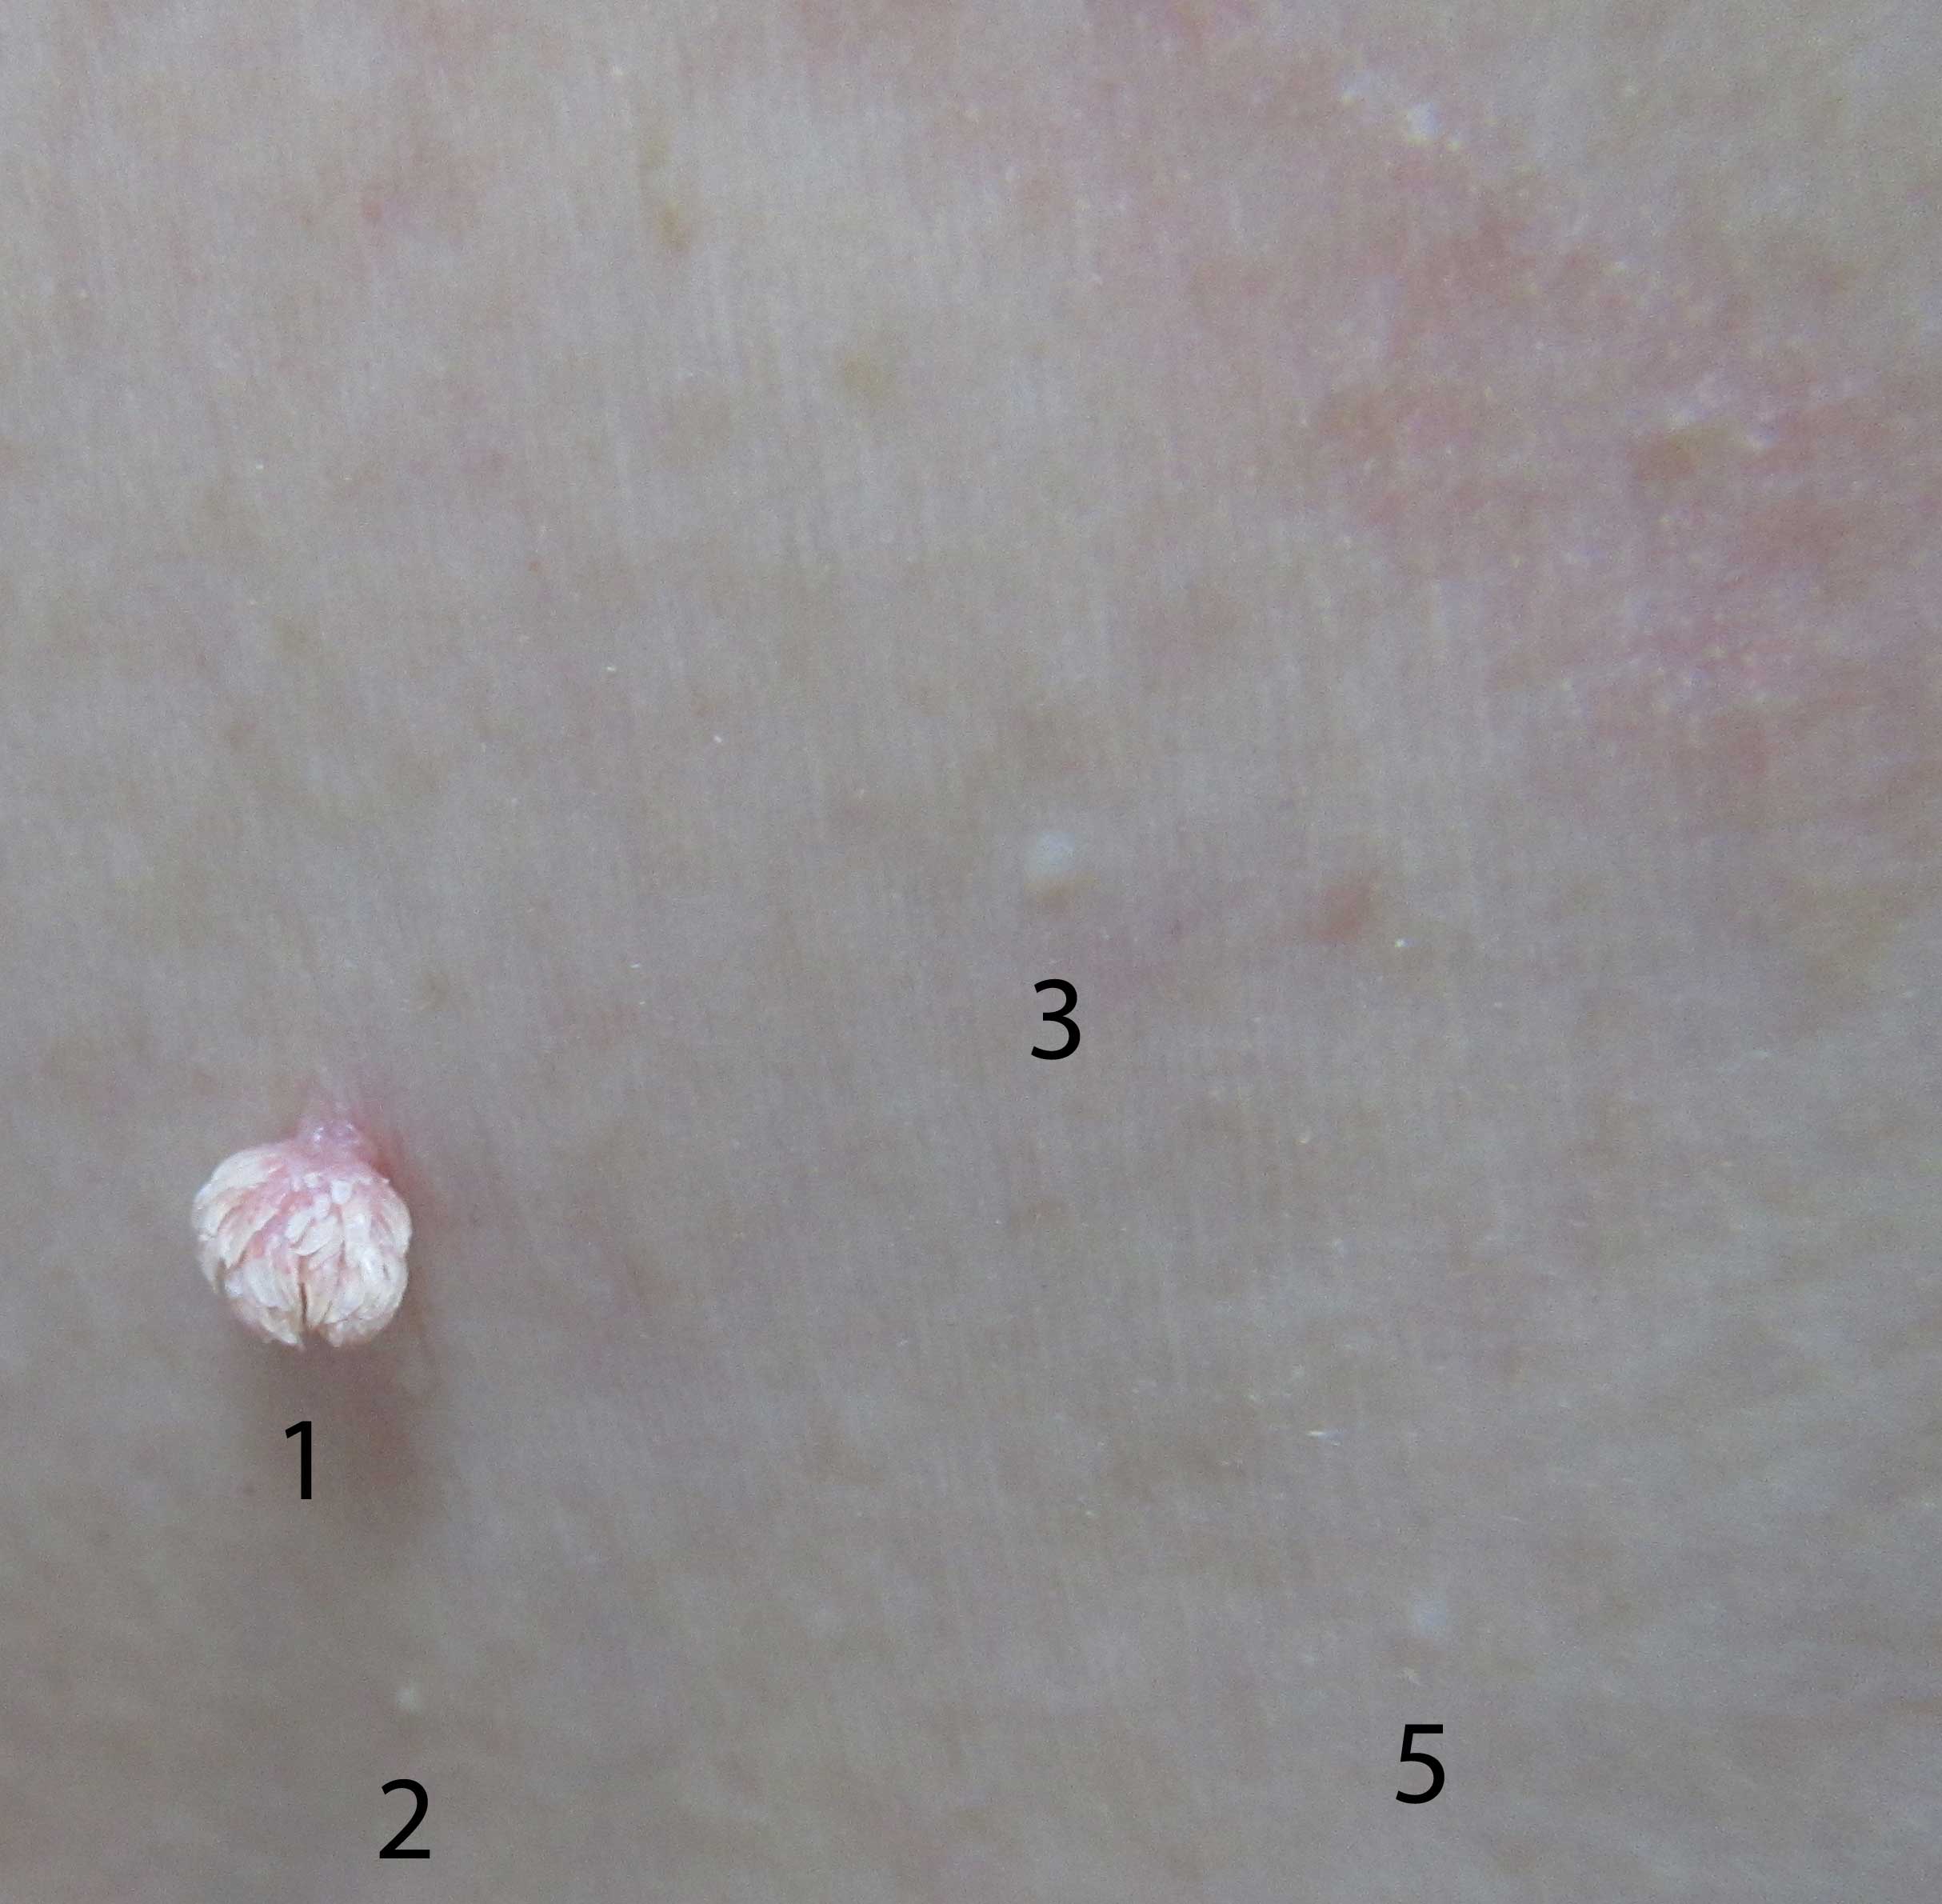 Multiple warts of varying sizes on the skin